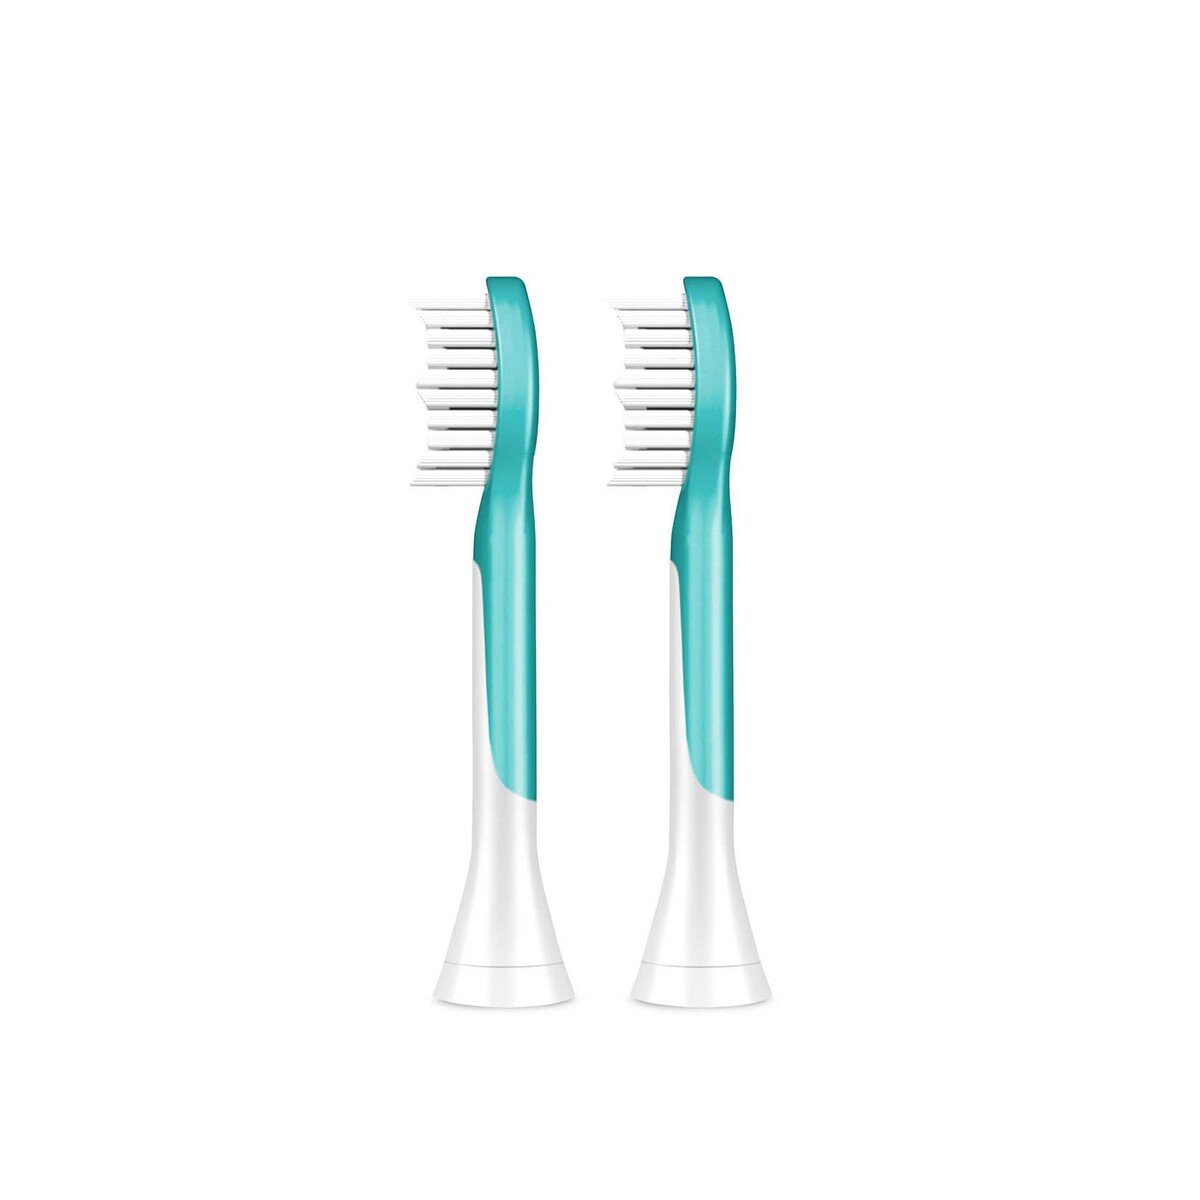 Philips Sonicare For Kids Standard Sonic Toothbrush heads HX6042